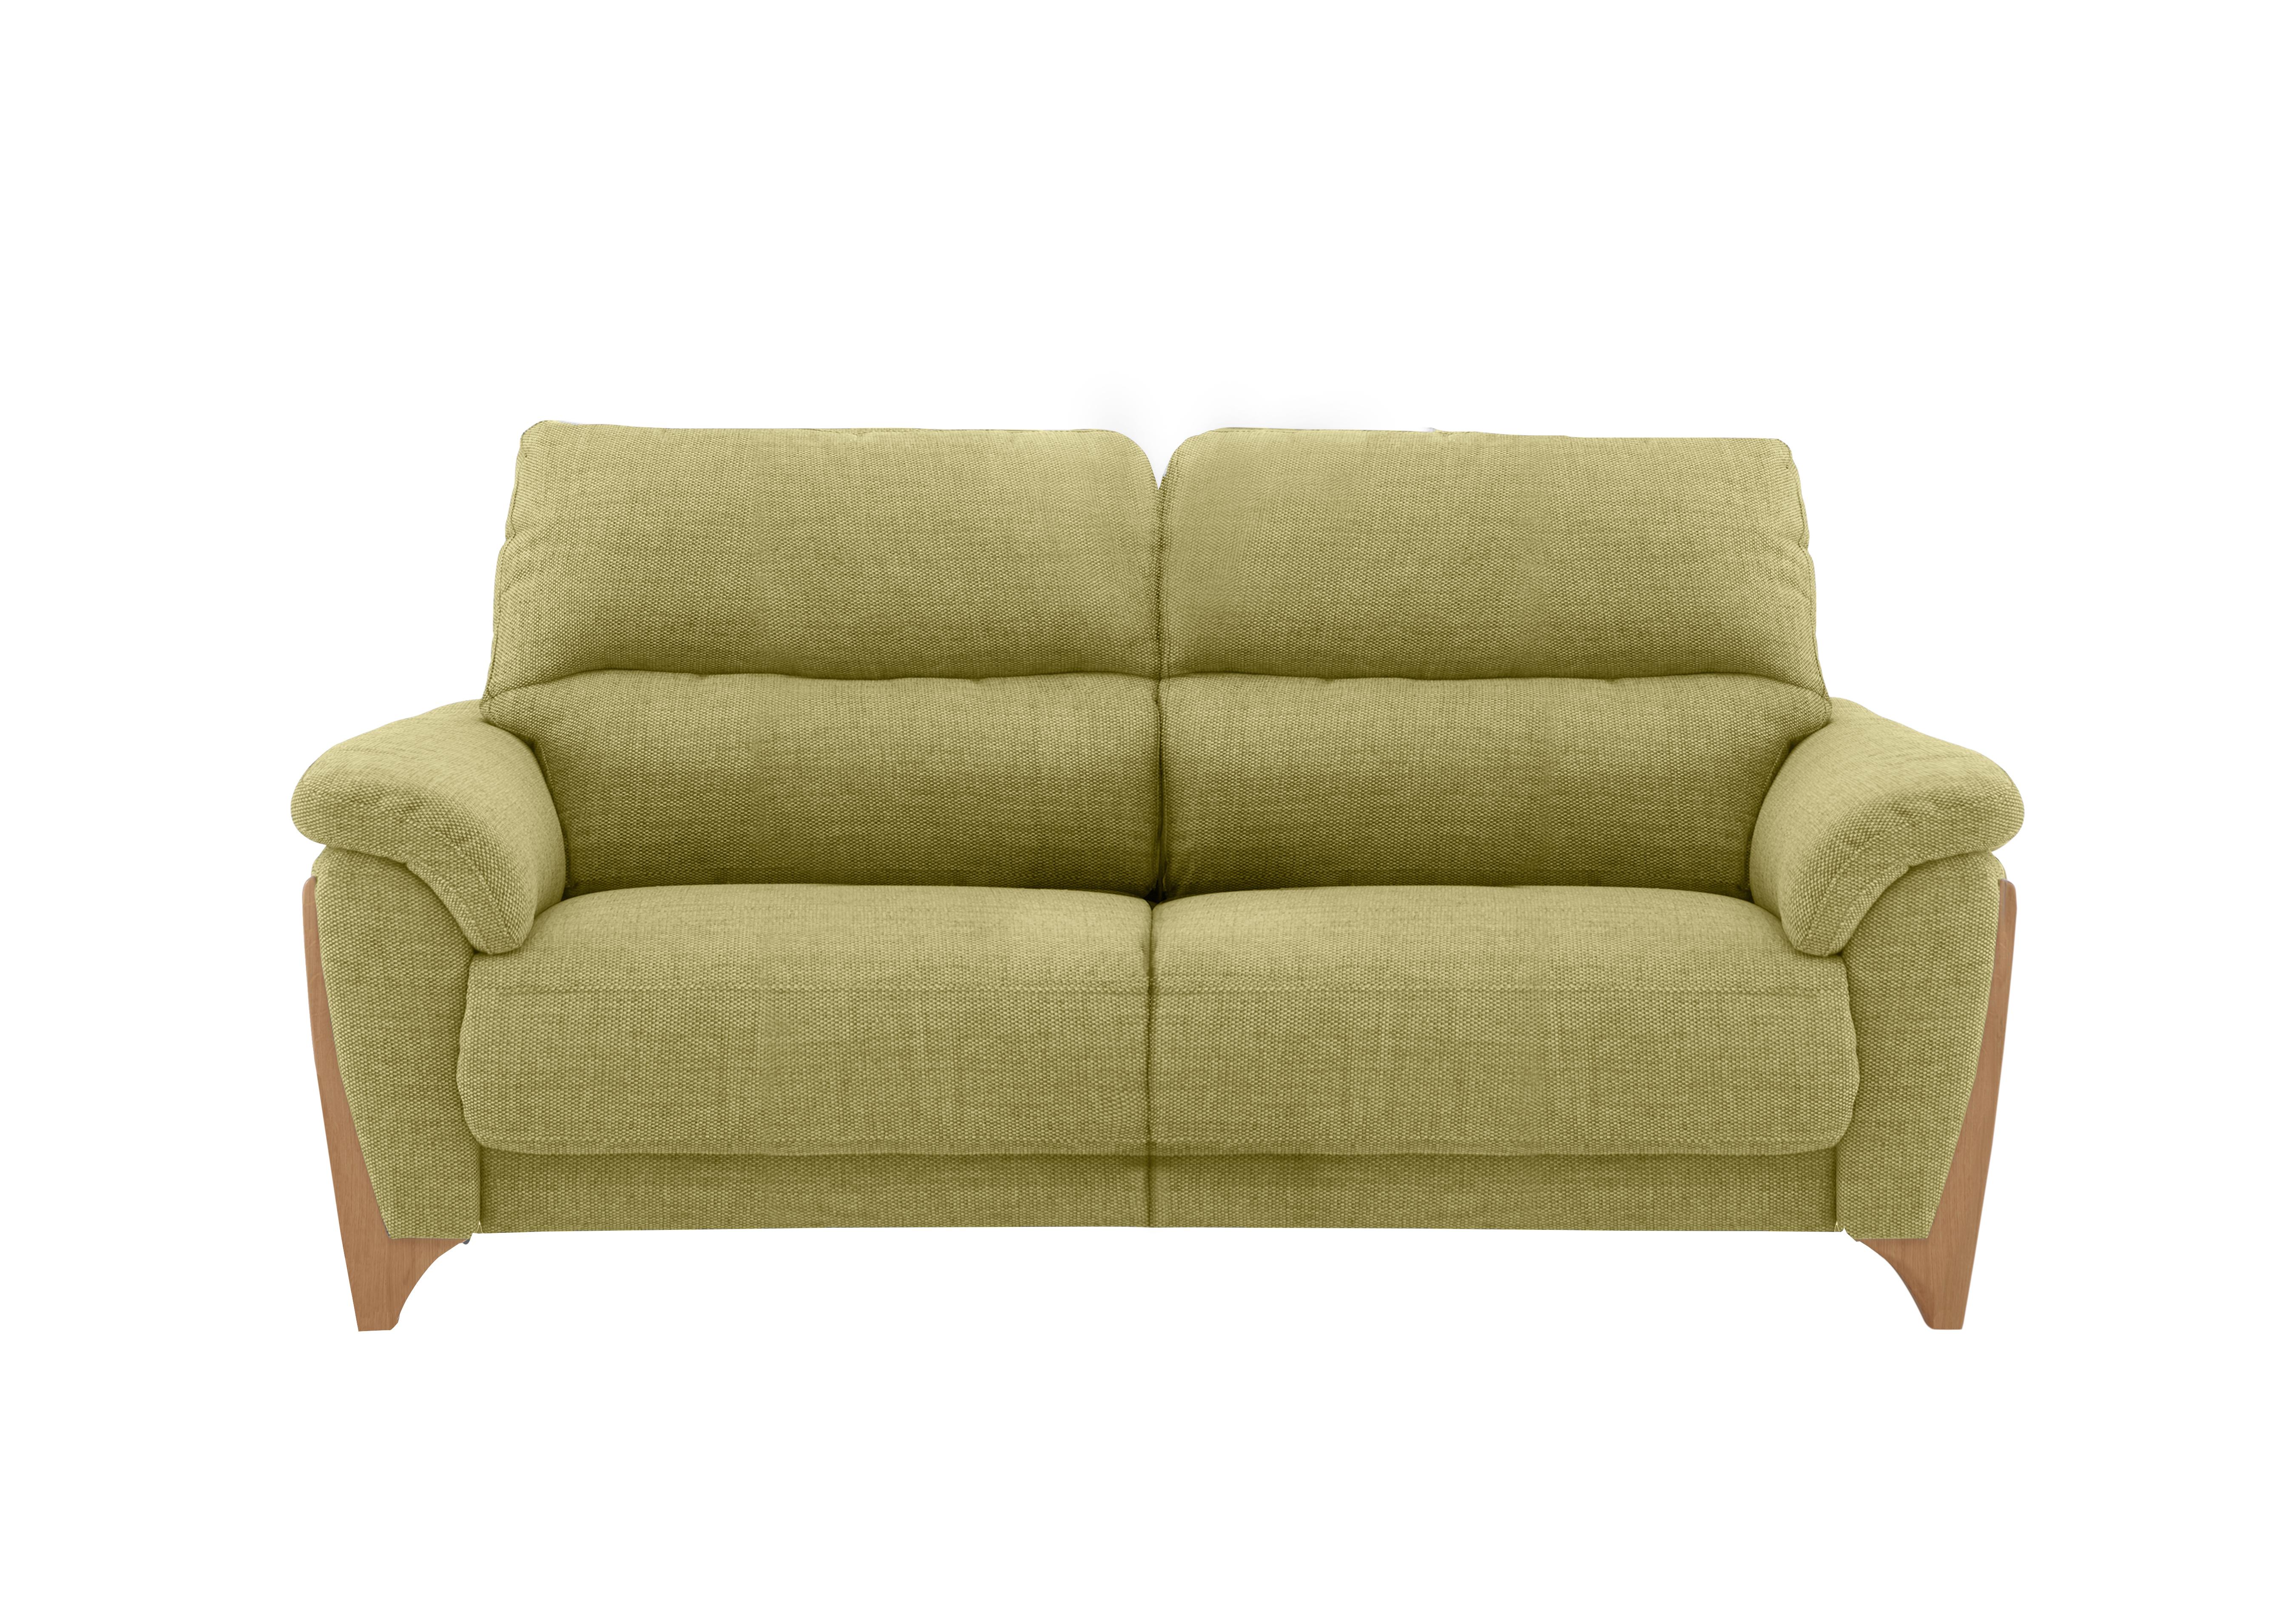 Enna Large Fabric Power Recliner Sofa in P220 on Furniture Village